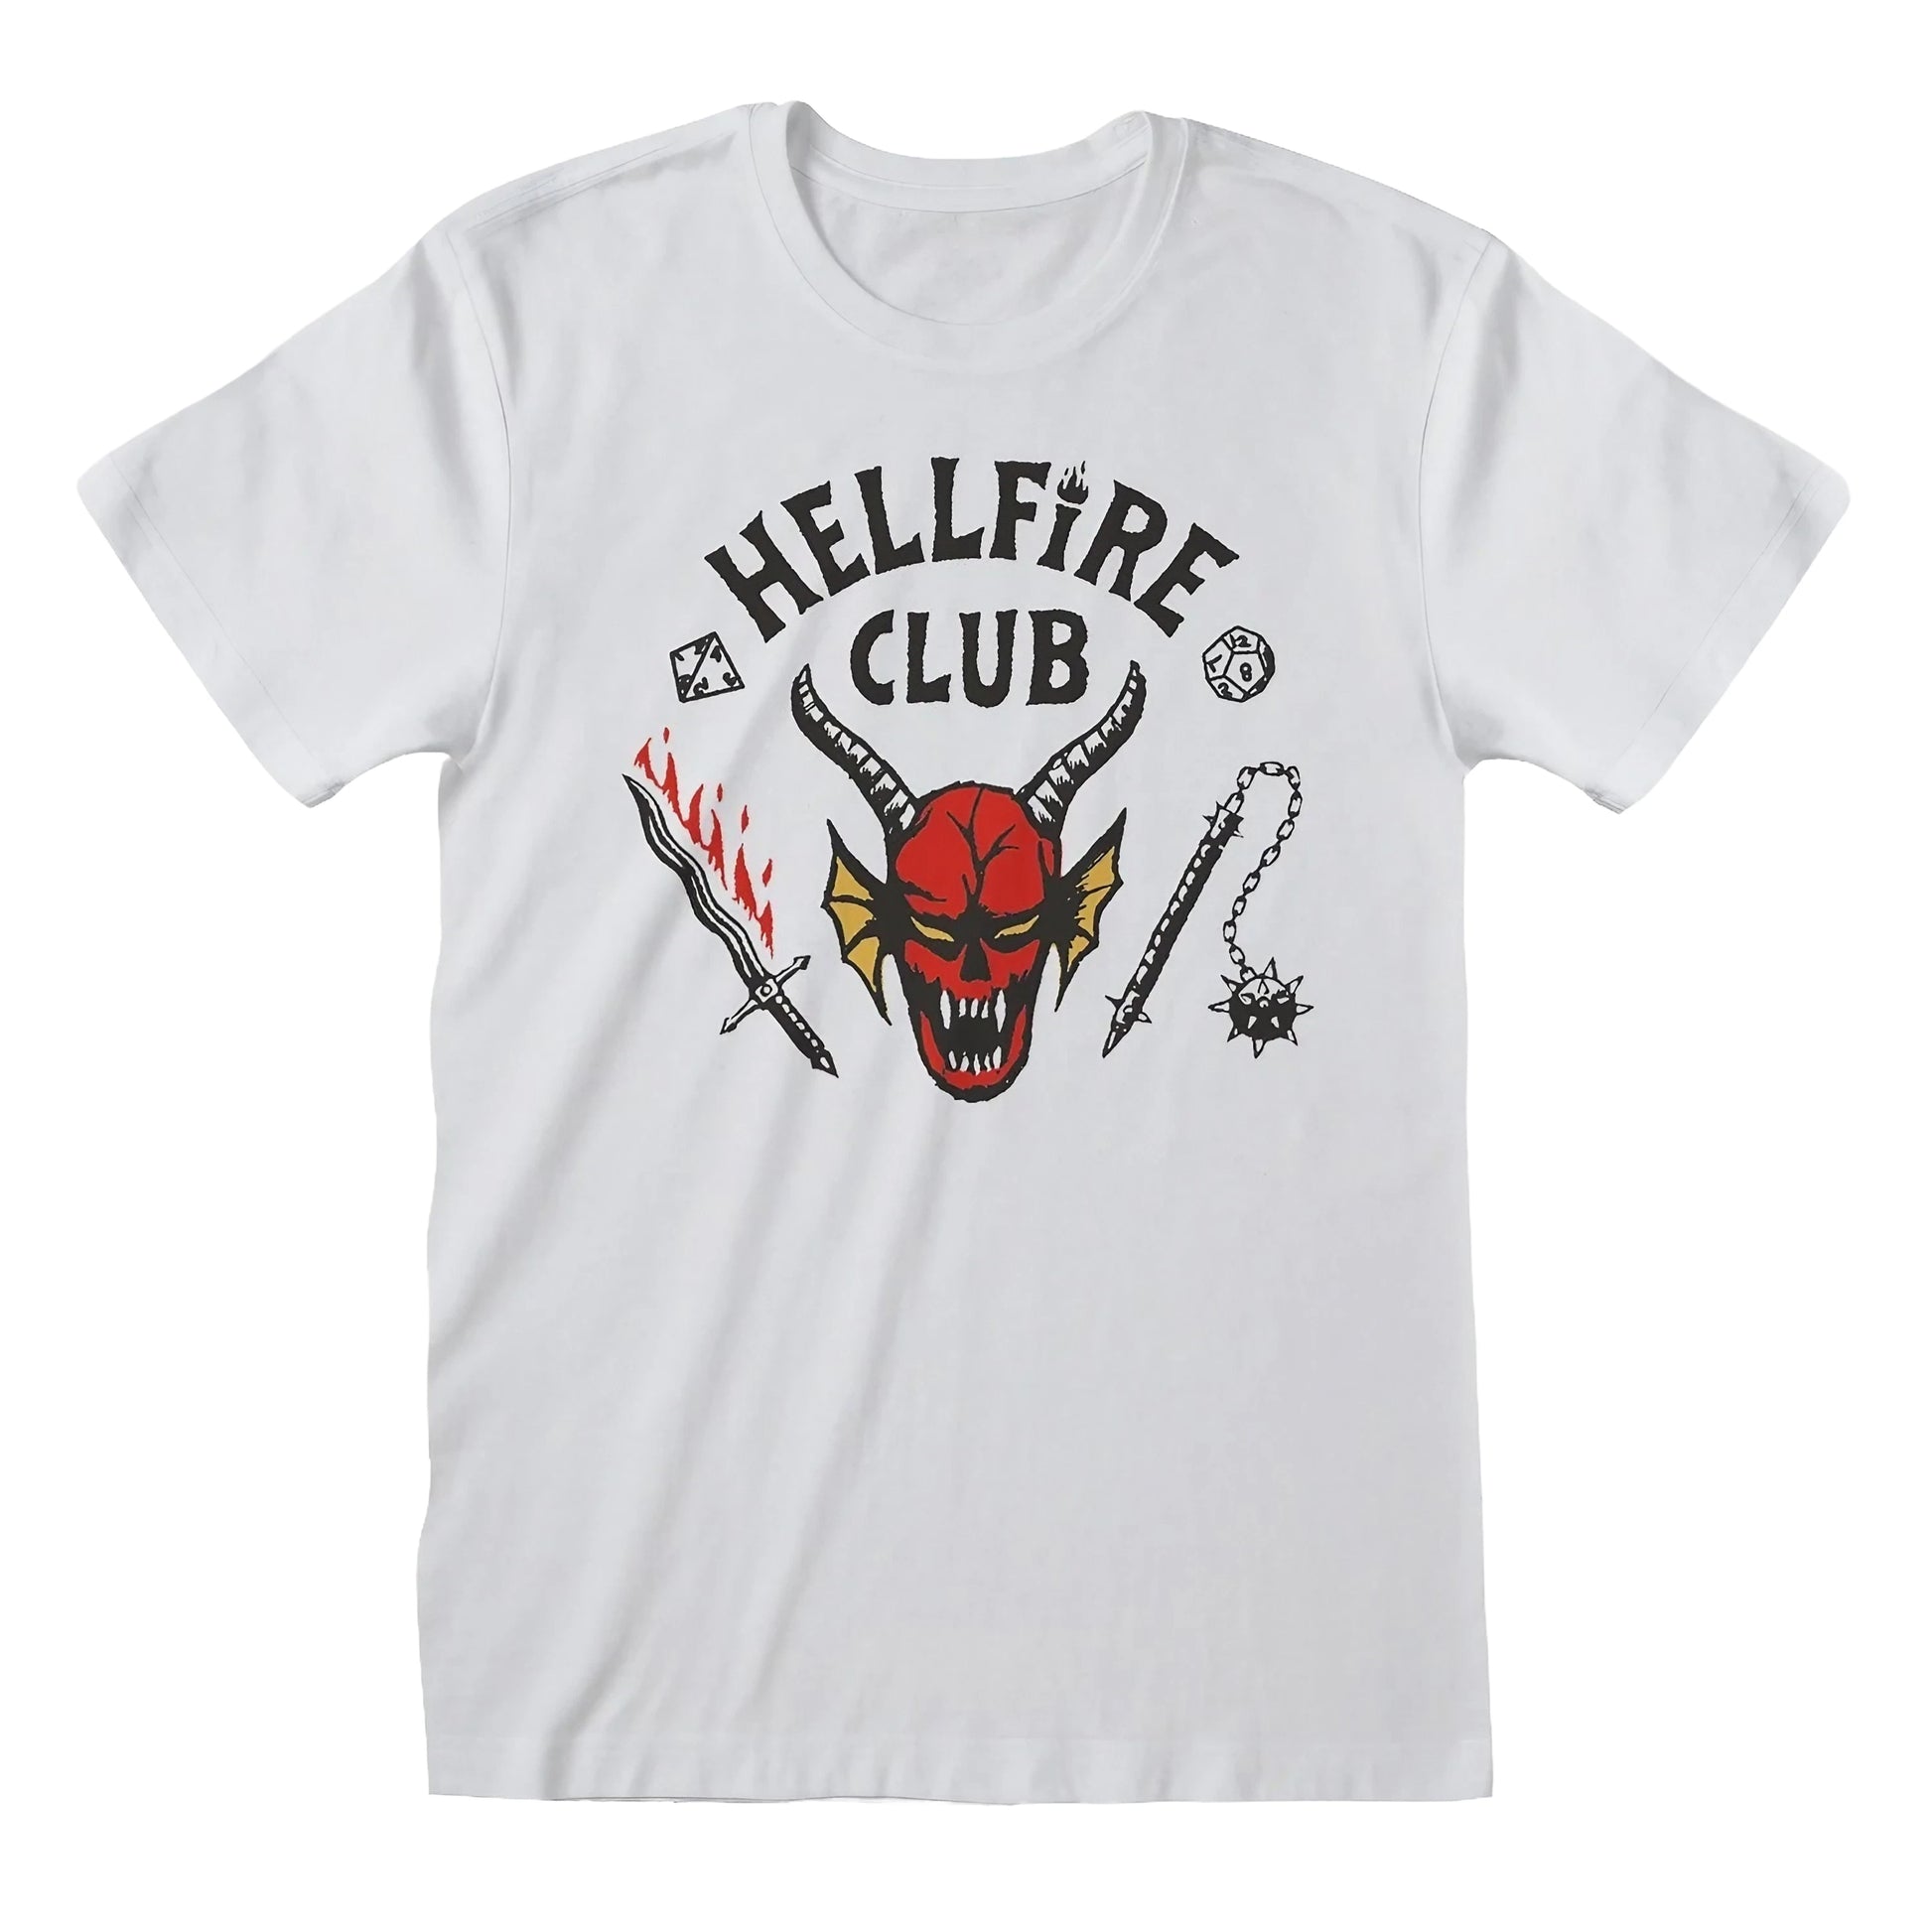 White 'Hellfire Club' t-shirt from the series Stranger Things